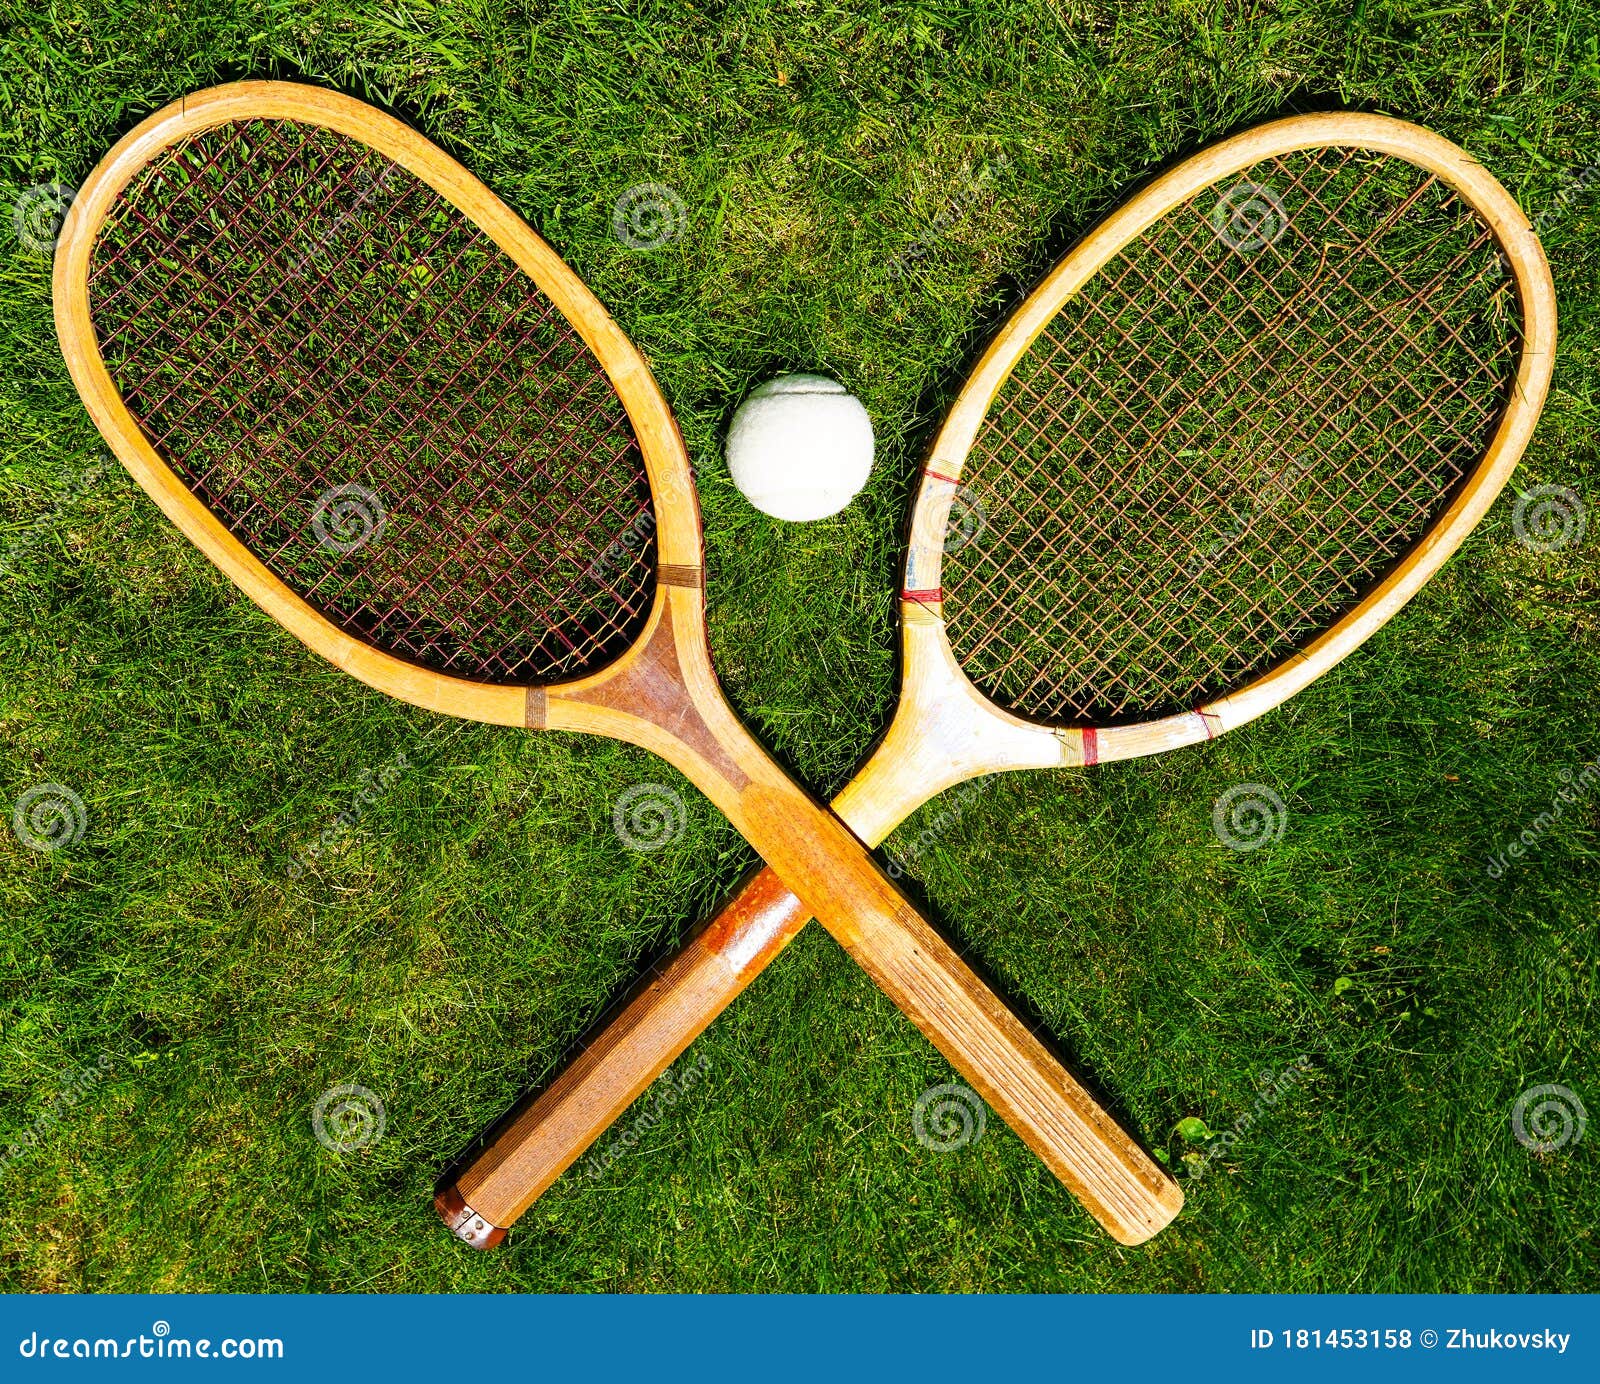 Vintage Tennis Racquets with Traditional White Ball on Grass Court Stock  Photo - Image of competition, objects: 181453158